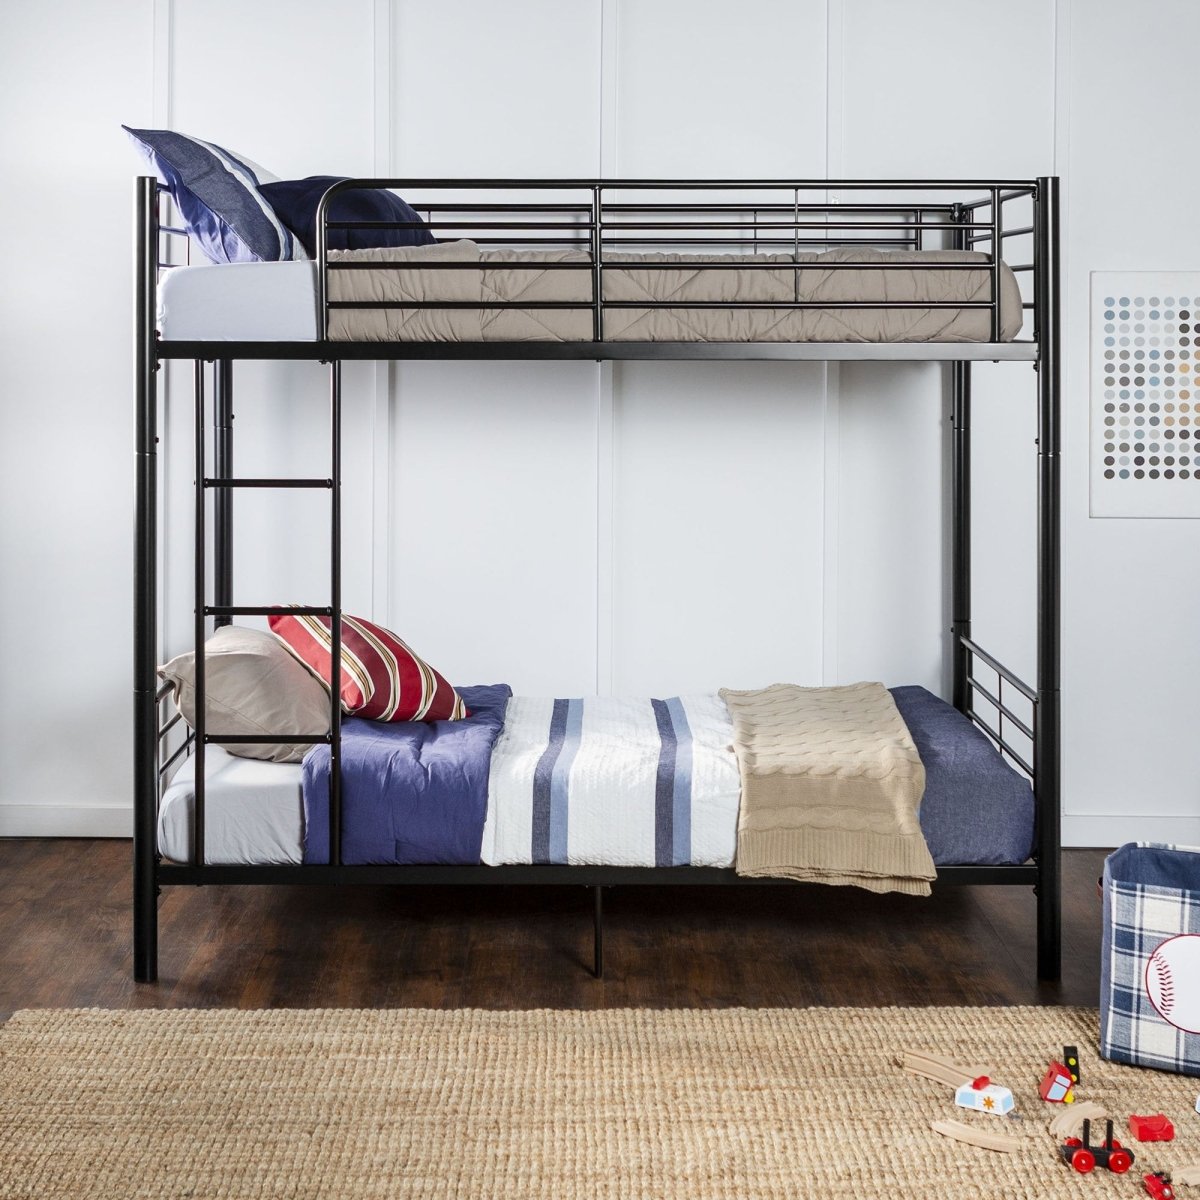 Walker Edison Sunset Twin Bunk Bed - lily & onyx